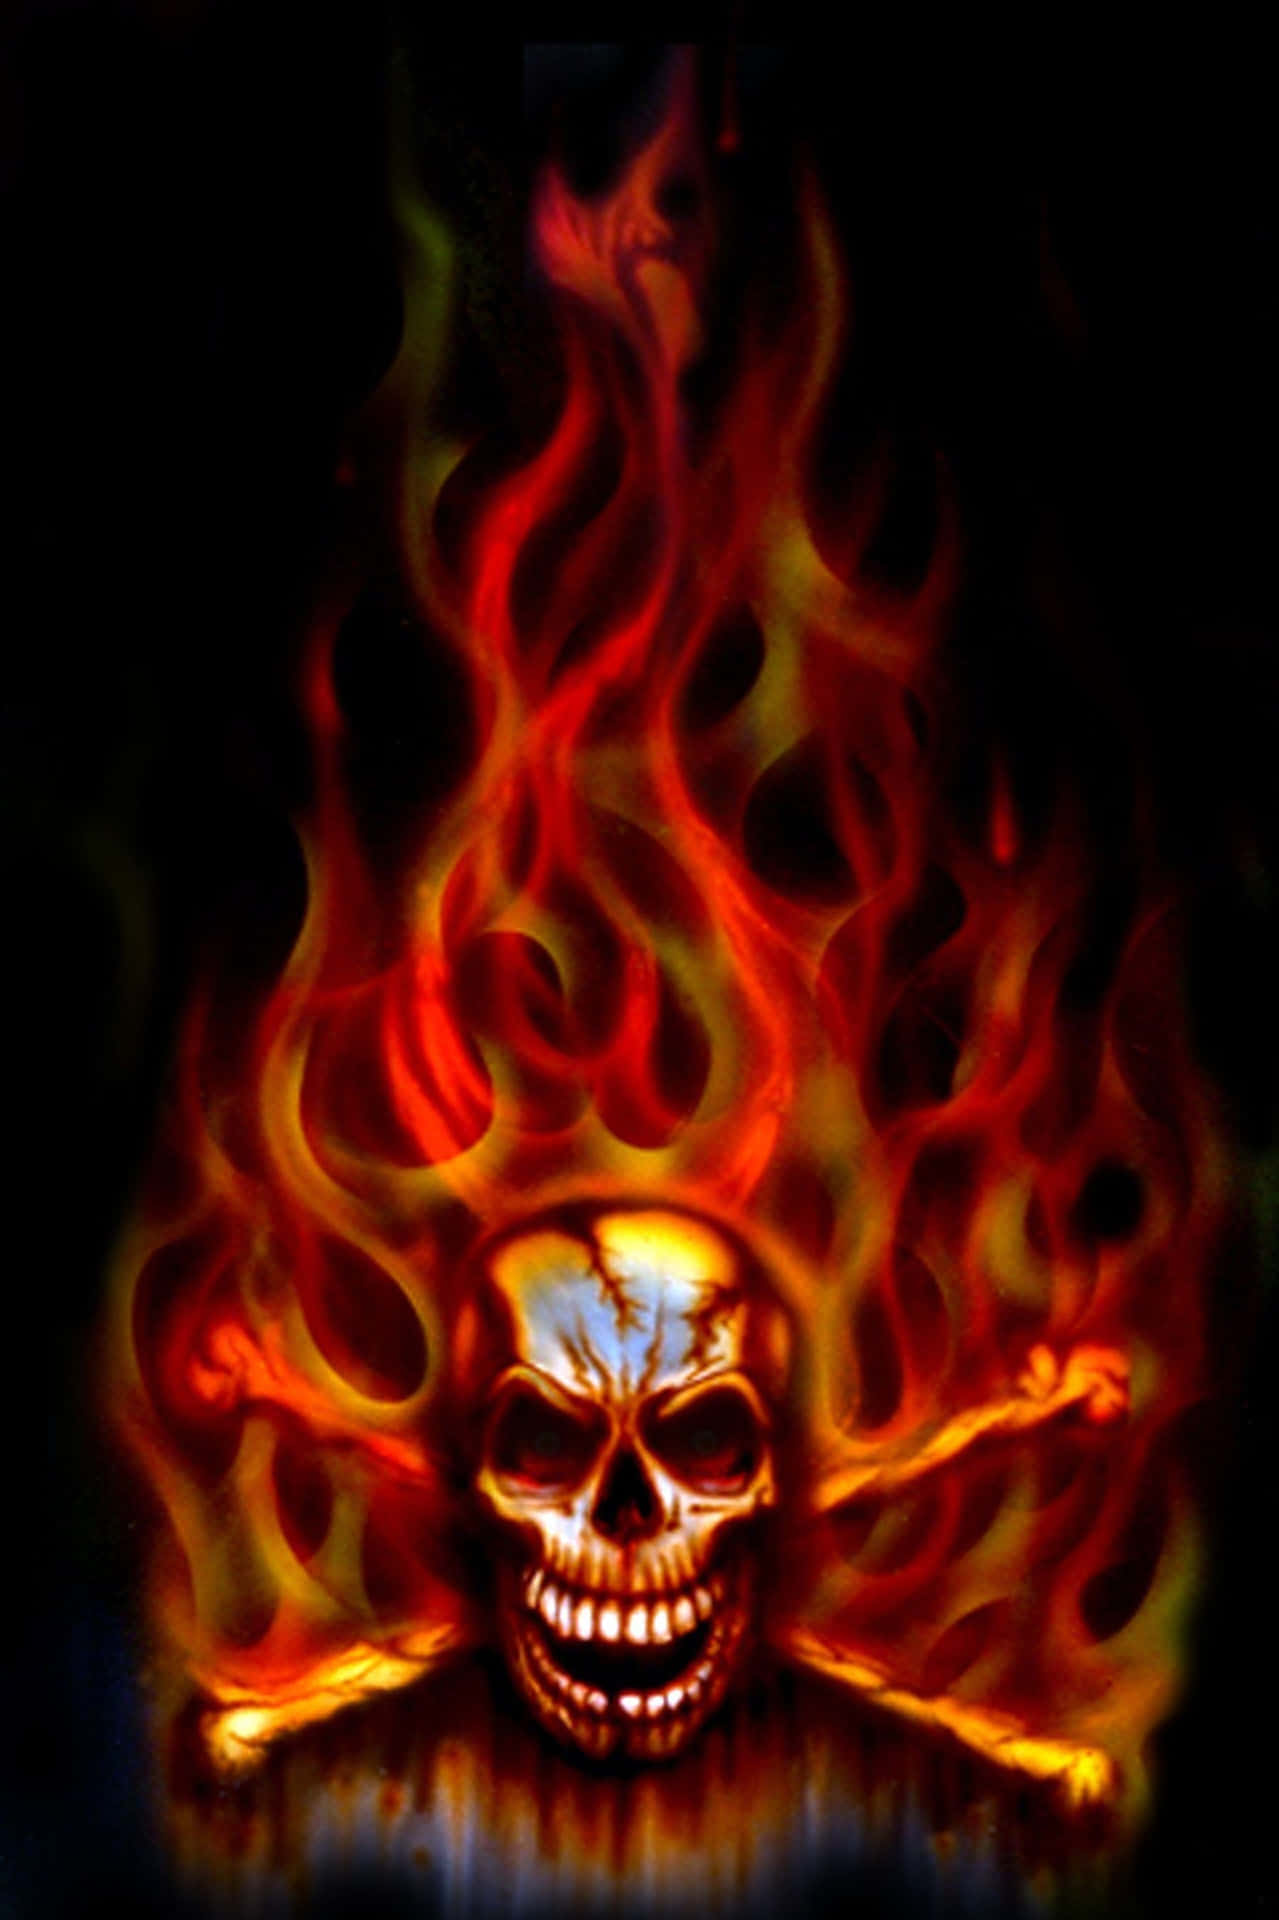 Illuminate the night with an eye-catching fire skull Wallpaper